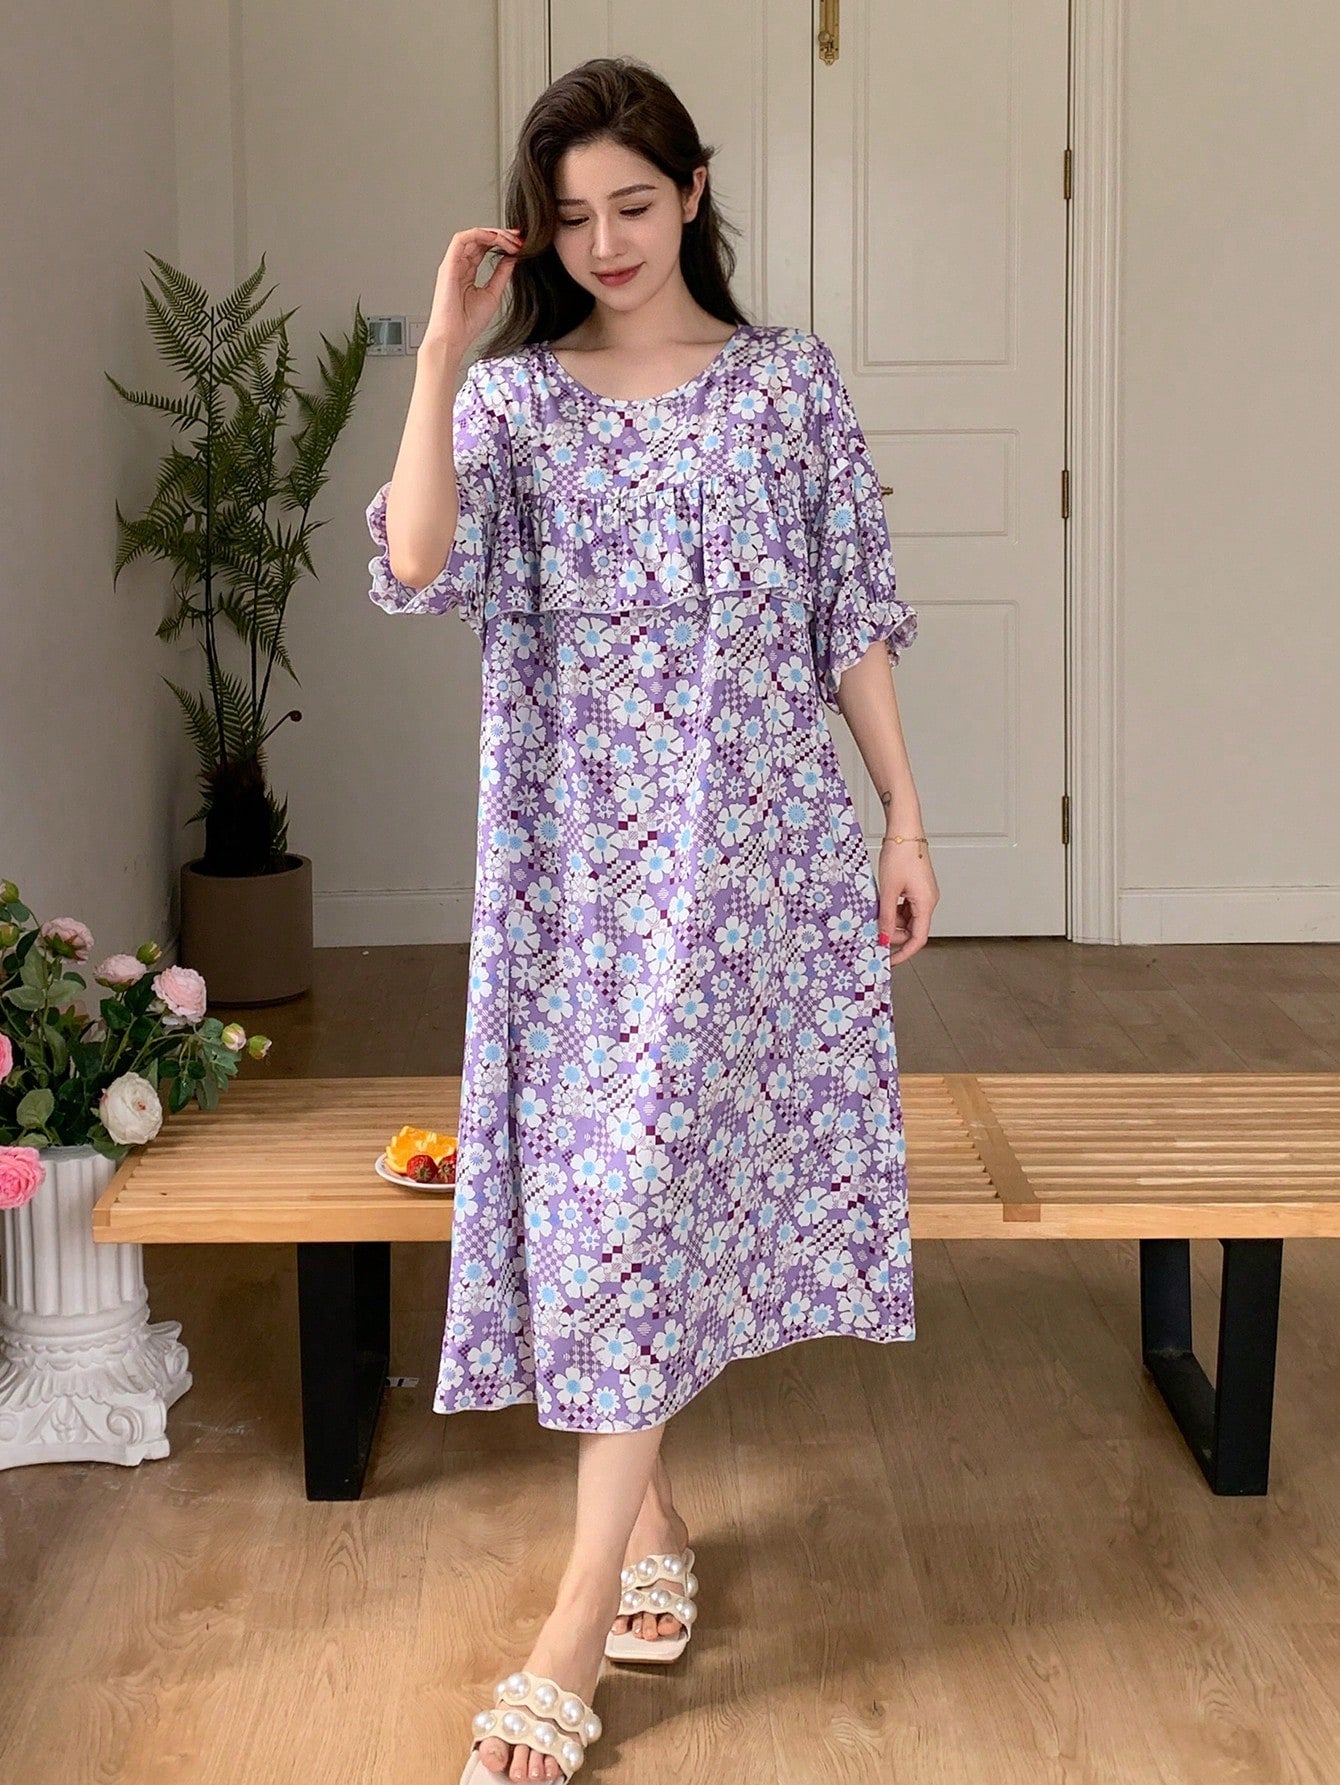 Floral Printed Loose Sleep Dress With Ruffled Hem Decoration For Summer